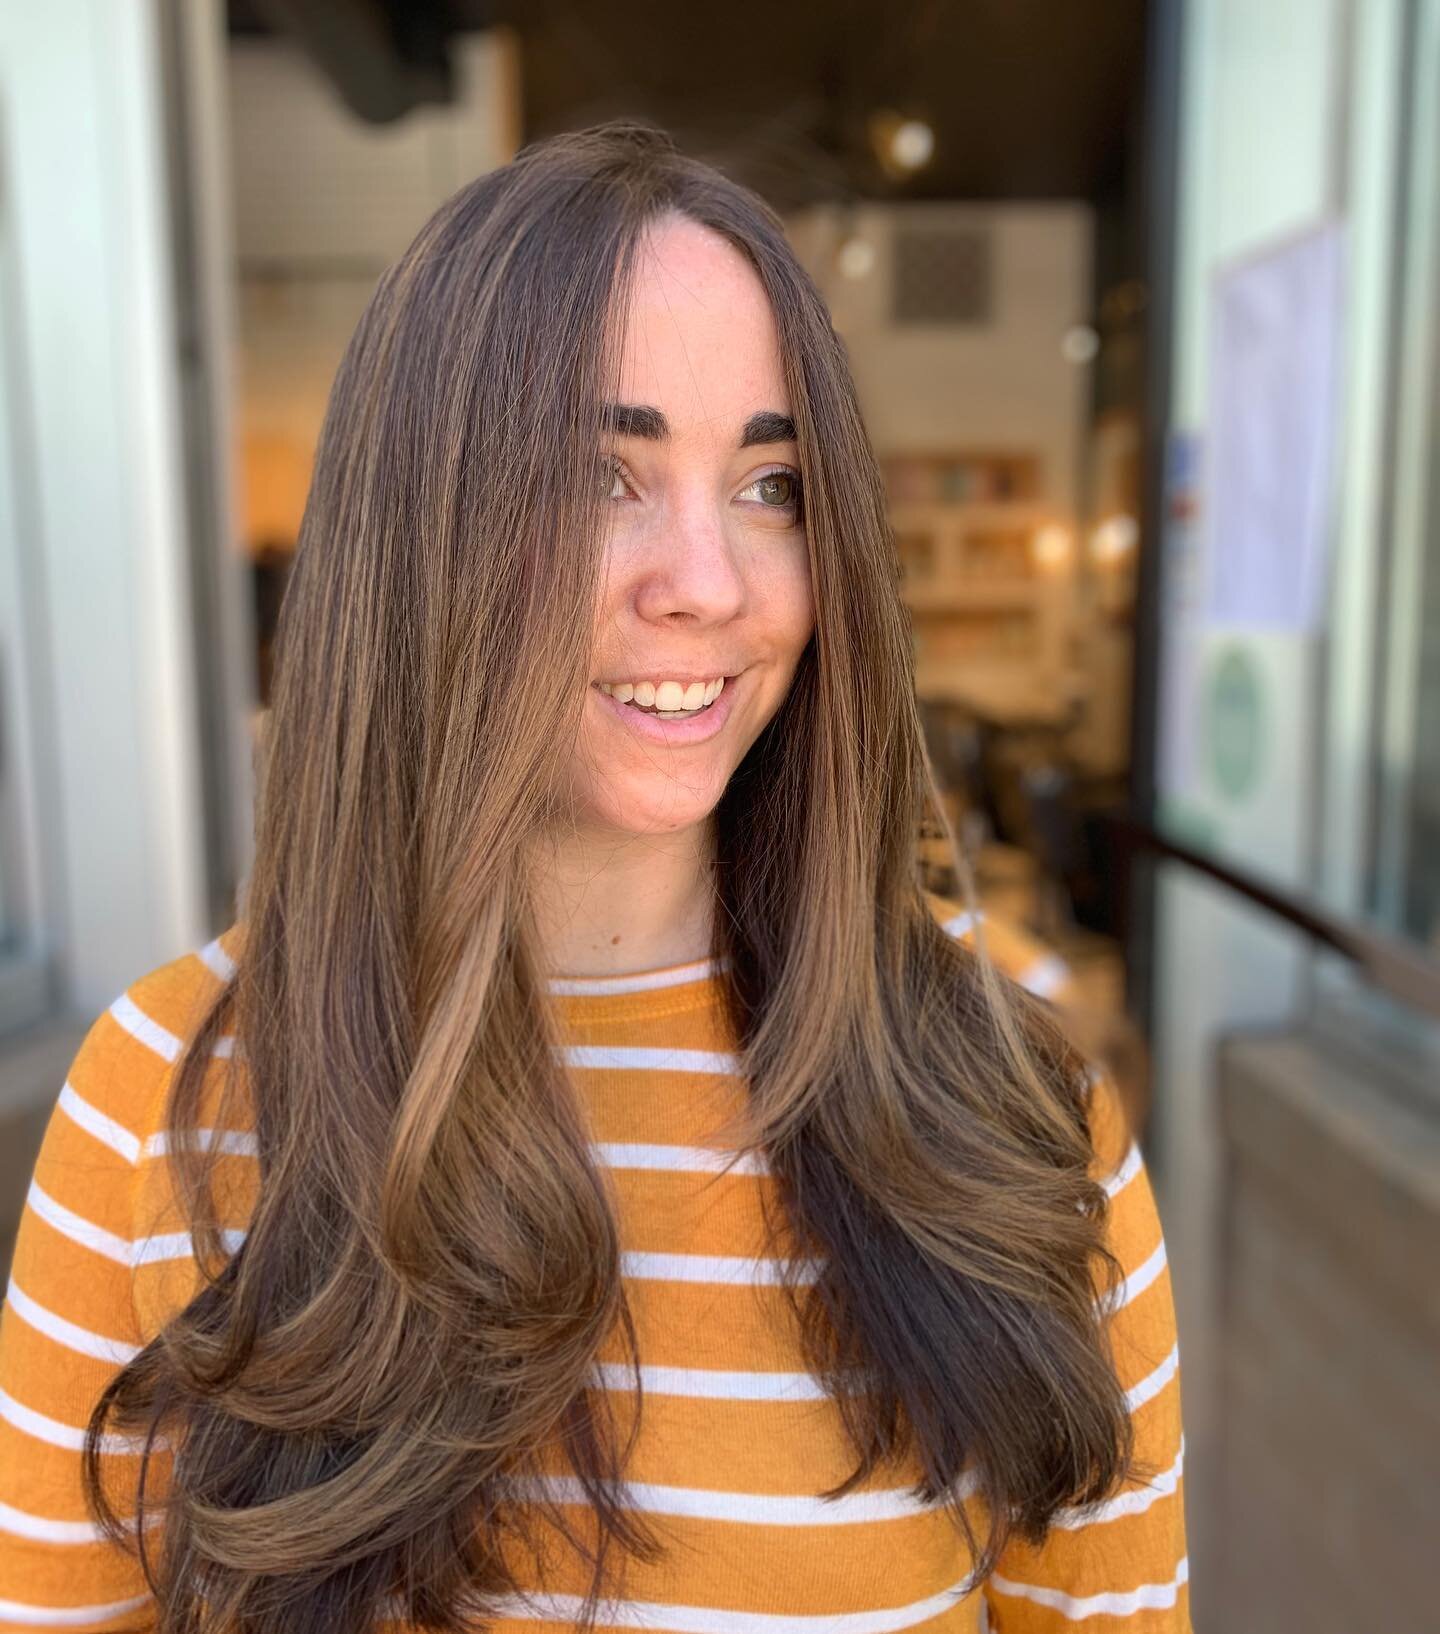 GLOSSY!  Re fresh this Three month balayage grow out with just a gloss #glossmakeseverythingbetter #balayage #dedhamstylist #hairfordays @kcarden @philosophehair